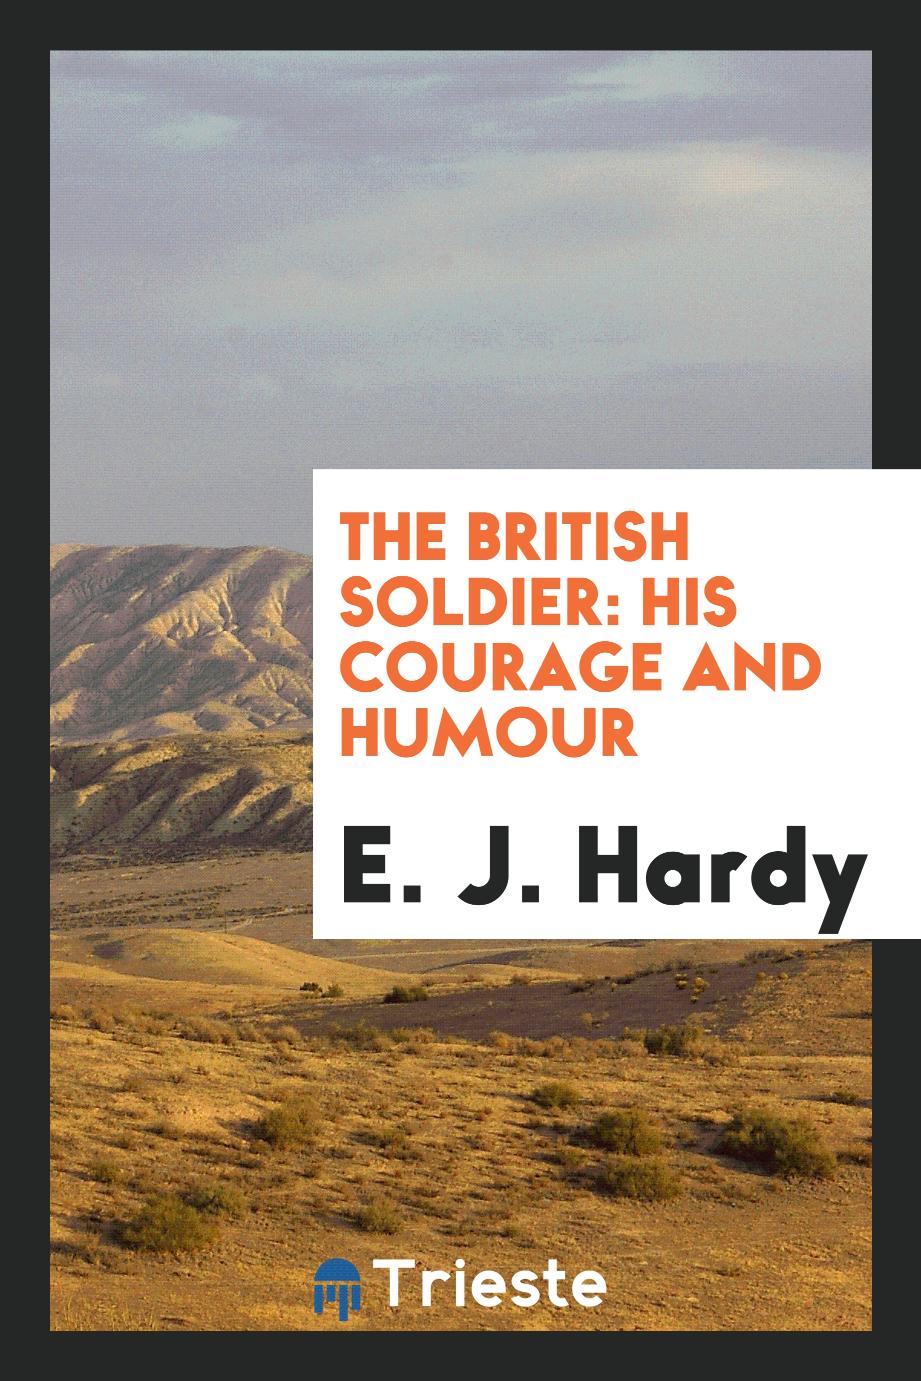 The British soldier: his courage and humour